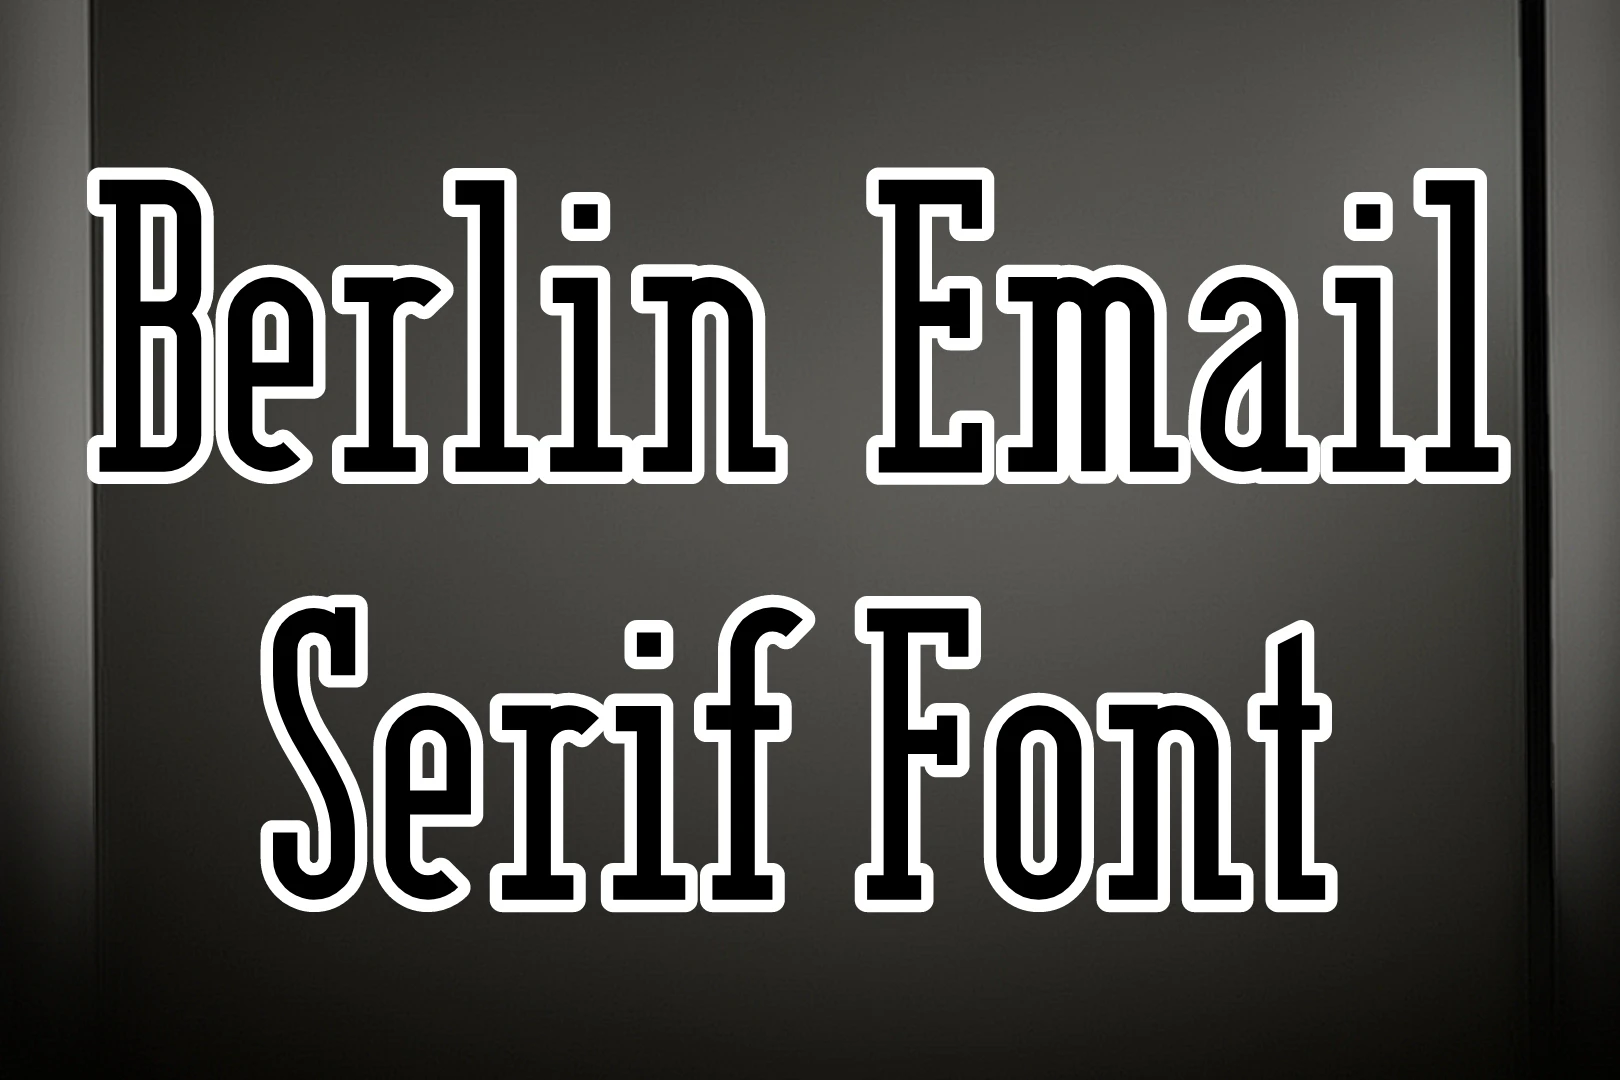 Berlin Email Serif Font Free Download